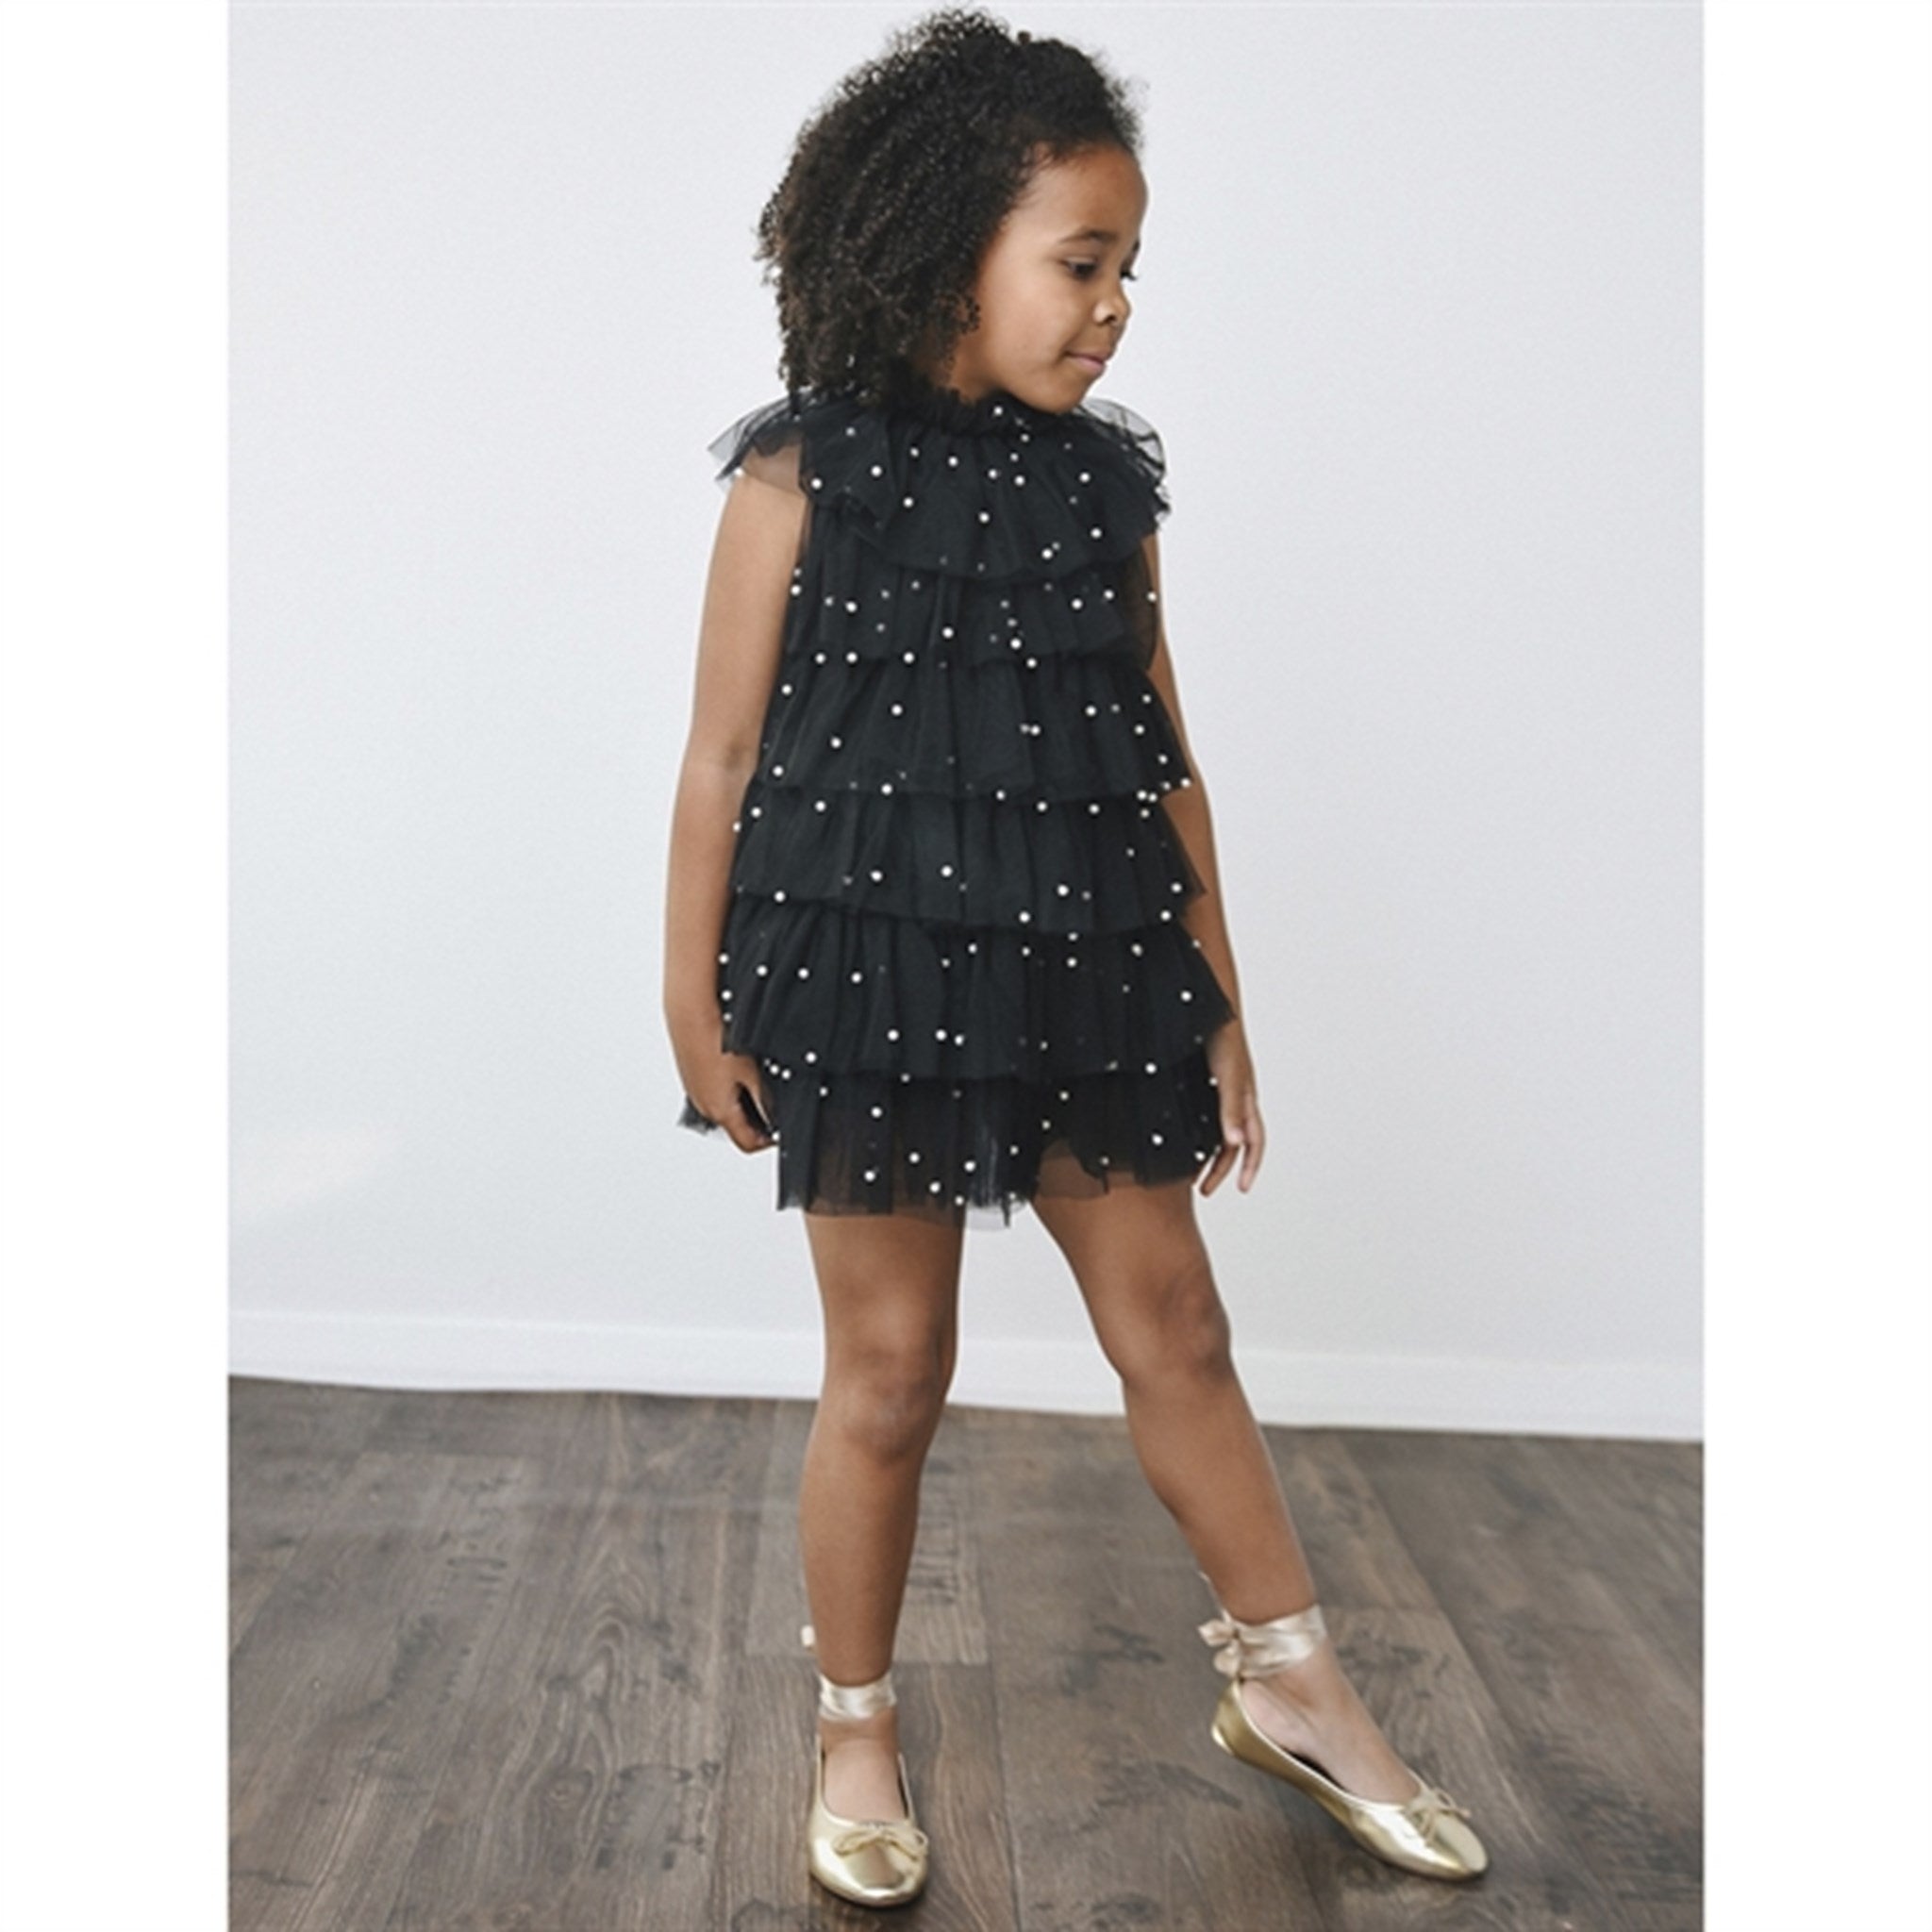 Dolly by Le Petit Tom Pearl Tutully Tiered Tulle Tuttu Kjole Black 6